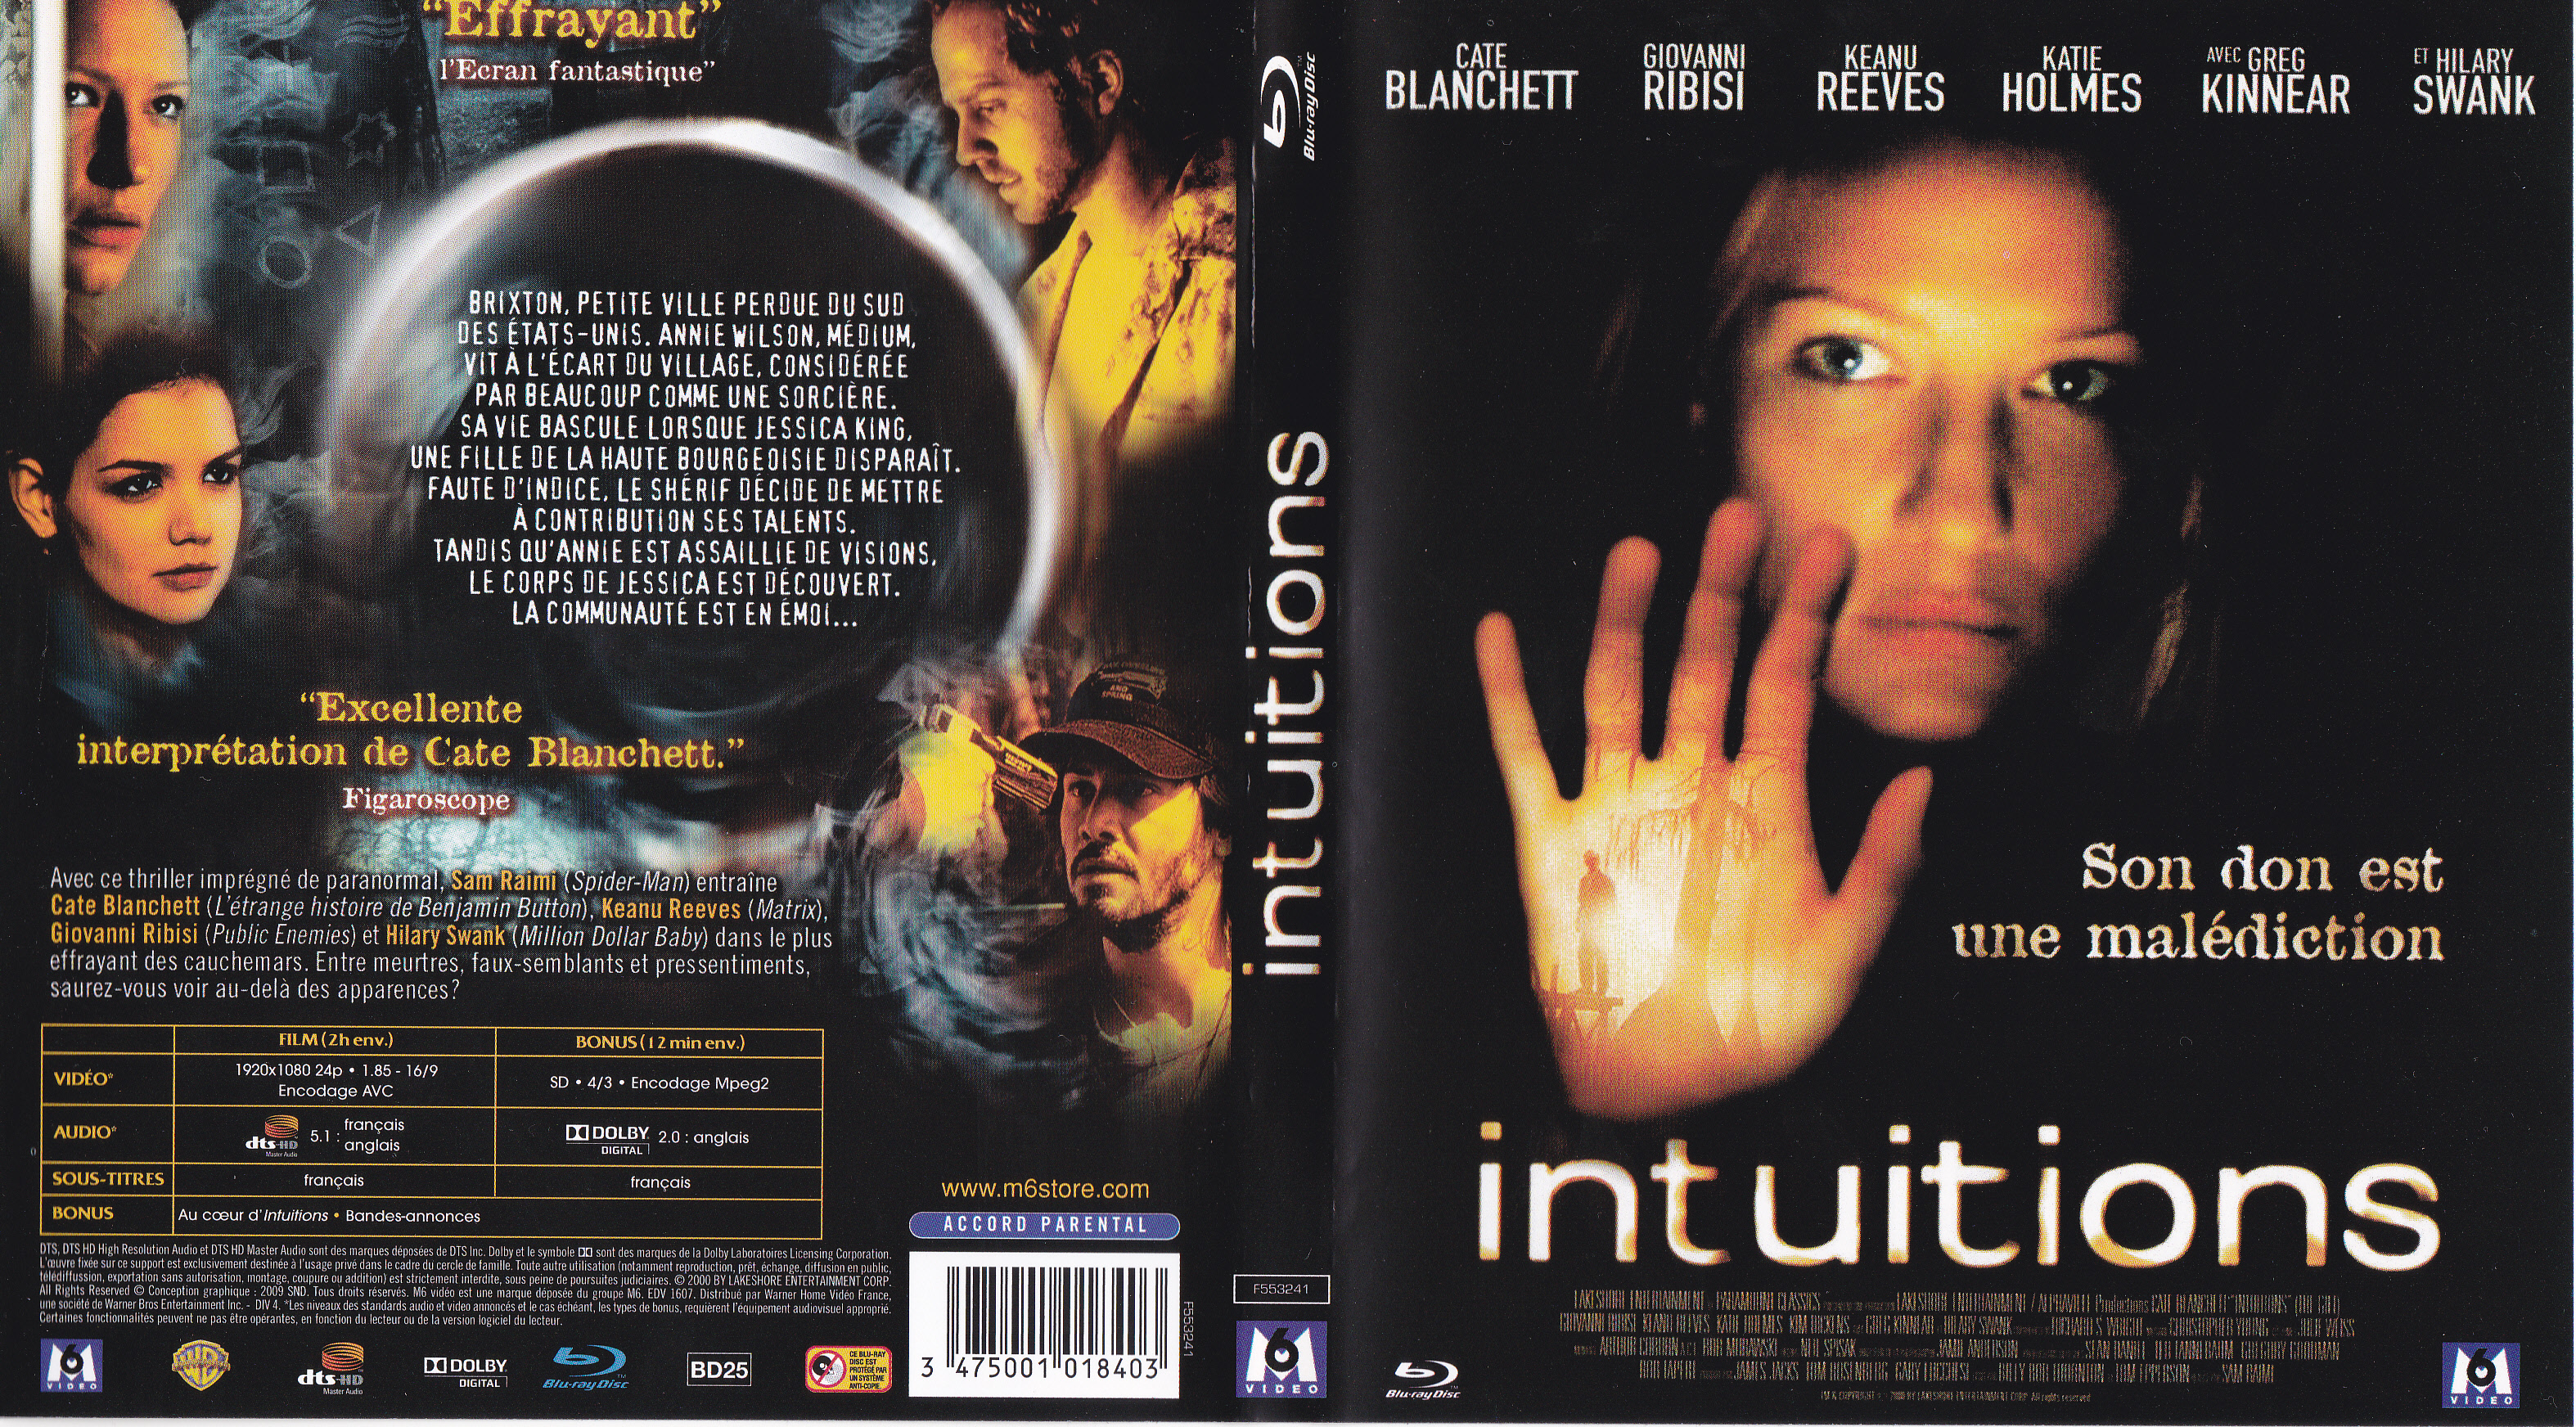 Jaquette DVD Intuitions (BLU-RAY)